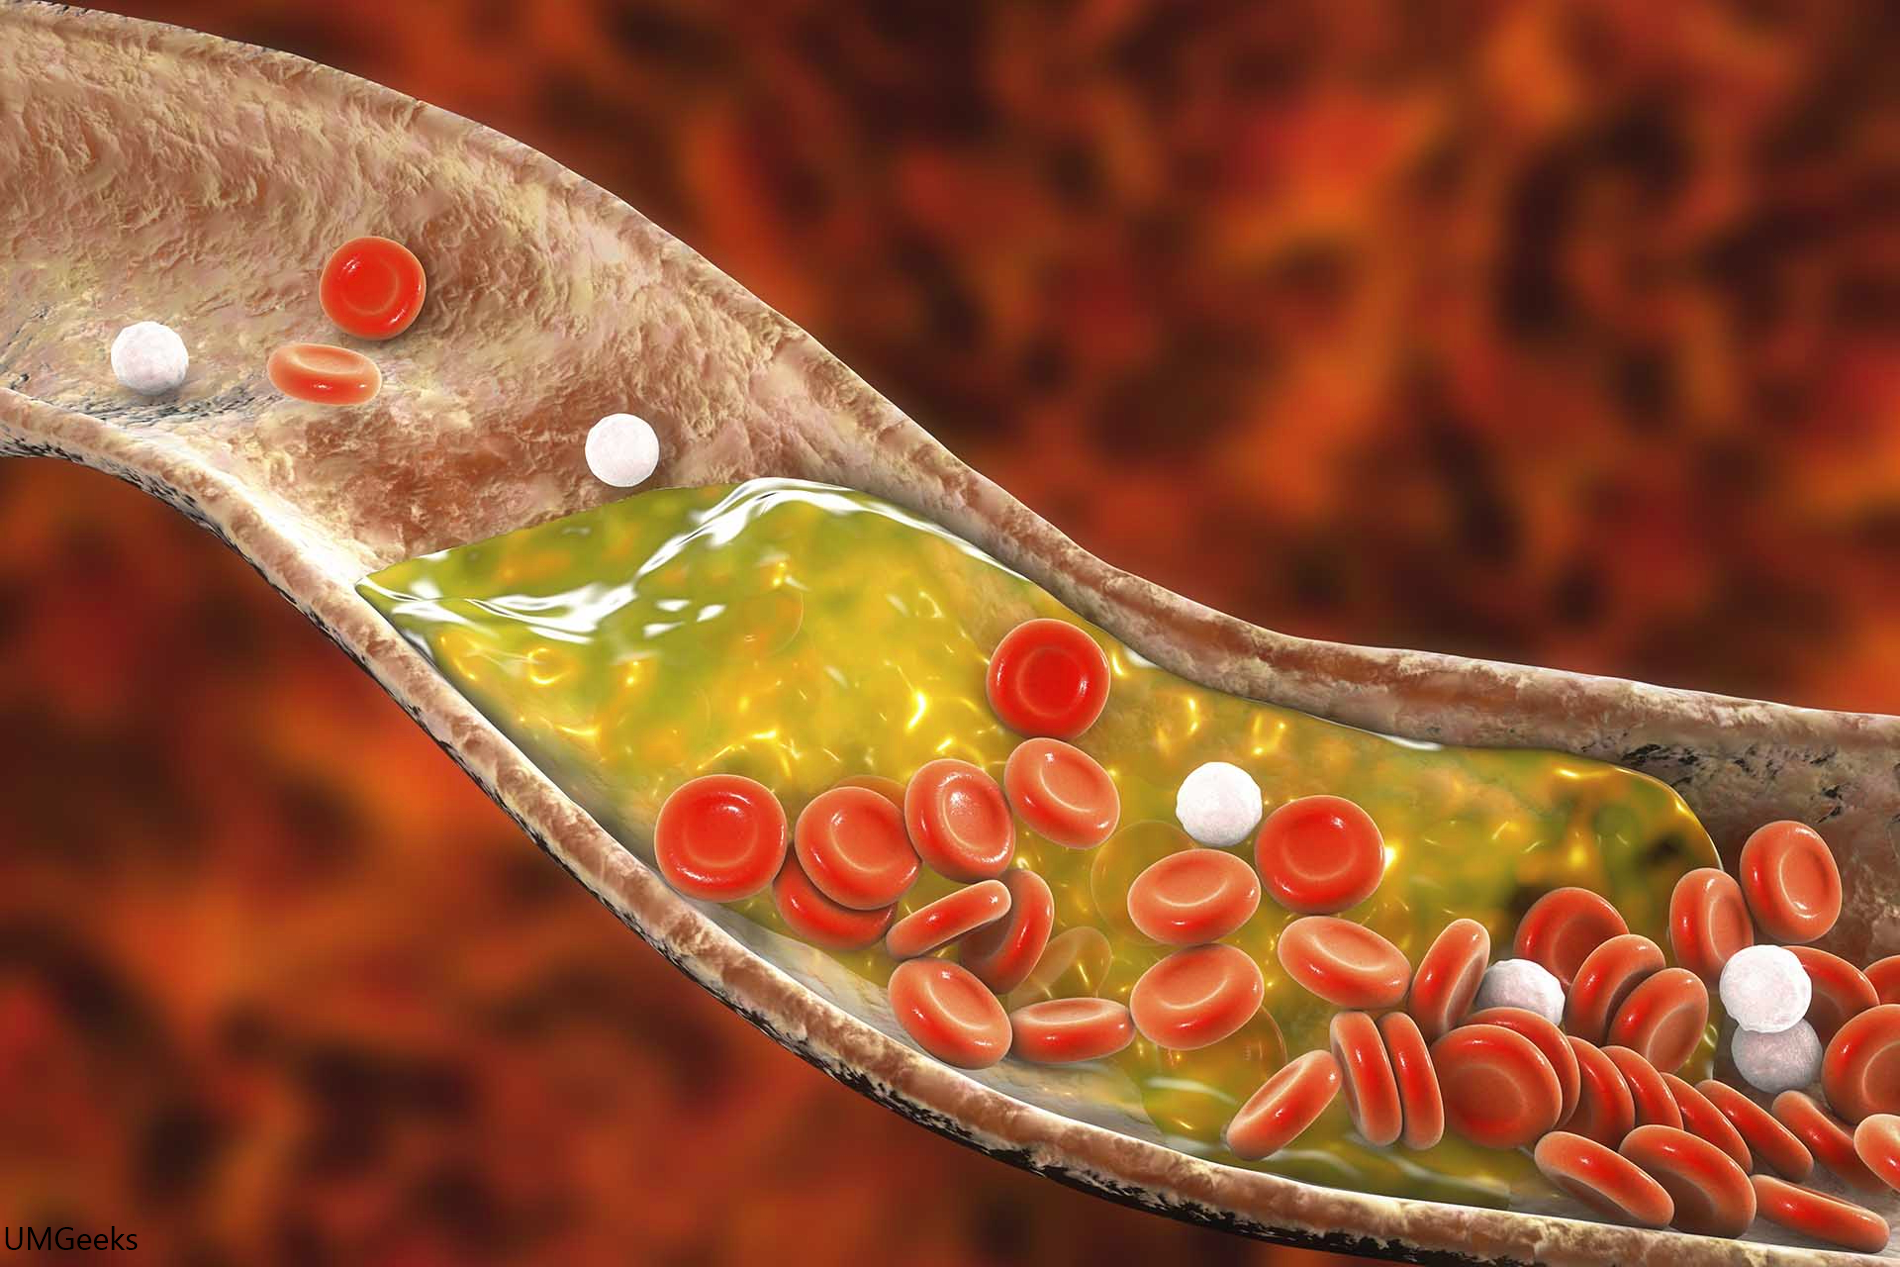 Cholesterol: Why is Cholesterol Needed for Life?